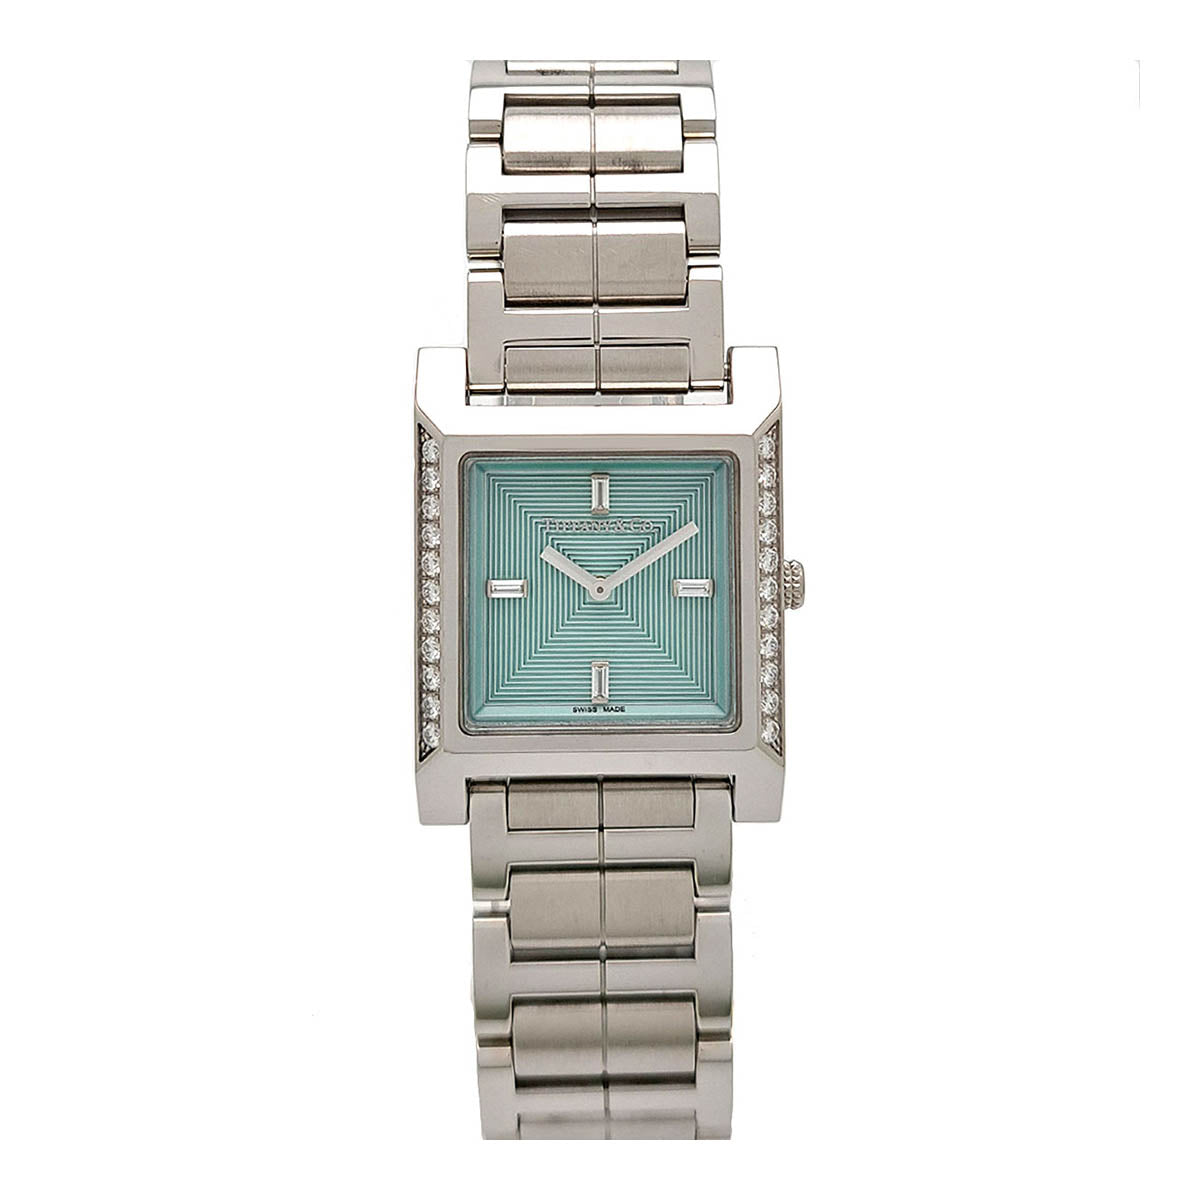 Tiffany & Co Makers Square Ladies Watch with Bezel Diamond 67460537, Quartz, Stainless Steel (Pre-Owned) 6.7460537E7